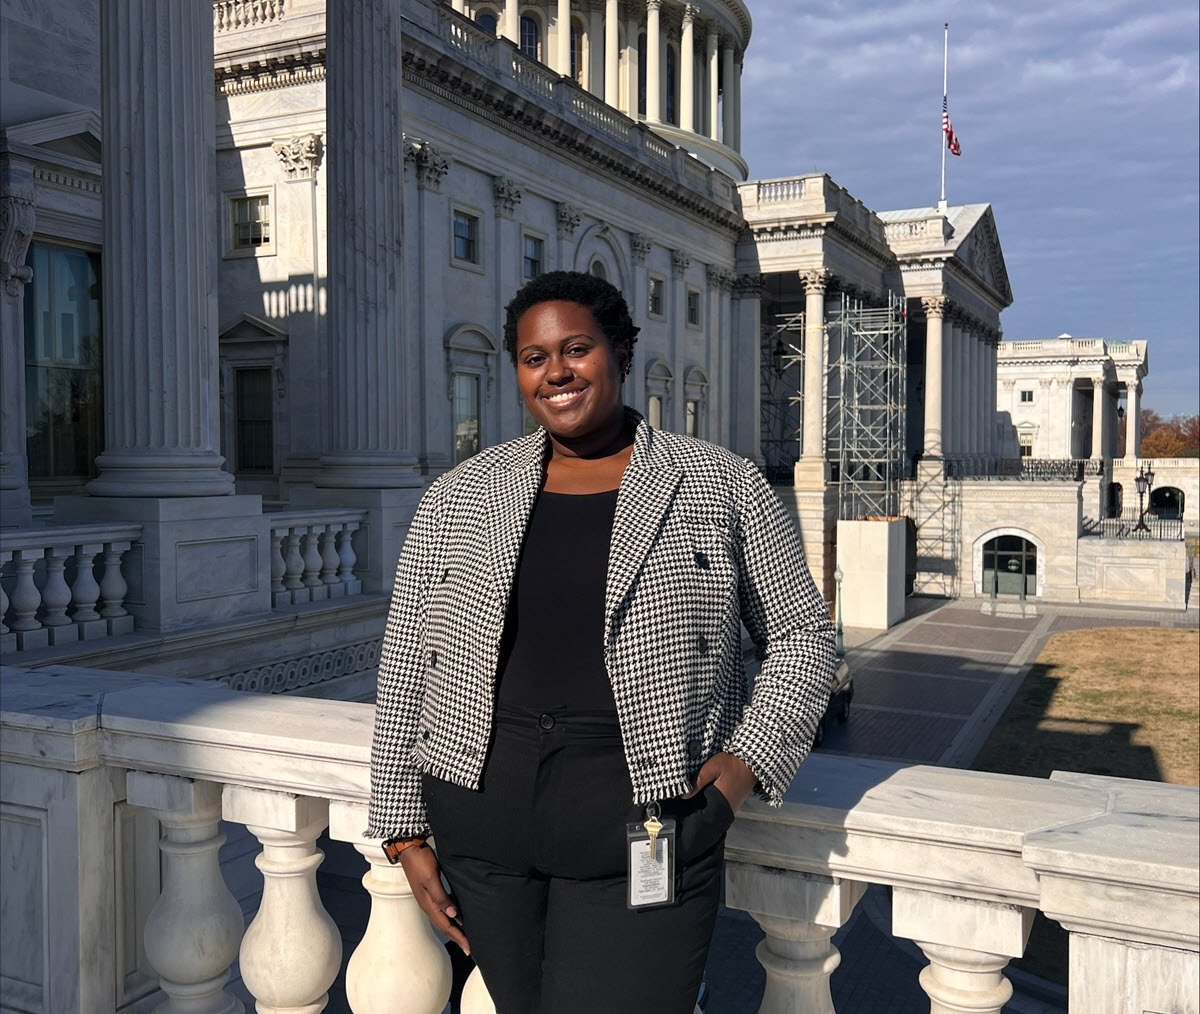 Baxter-sponsored fellow stands outside the U.S. Capitol